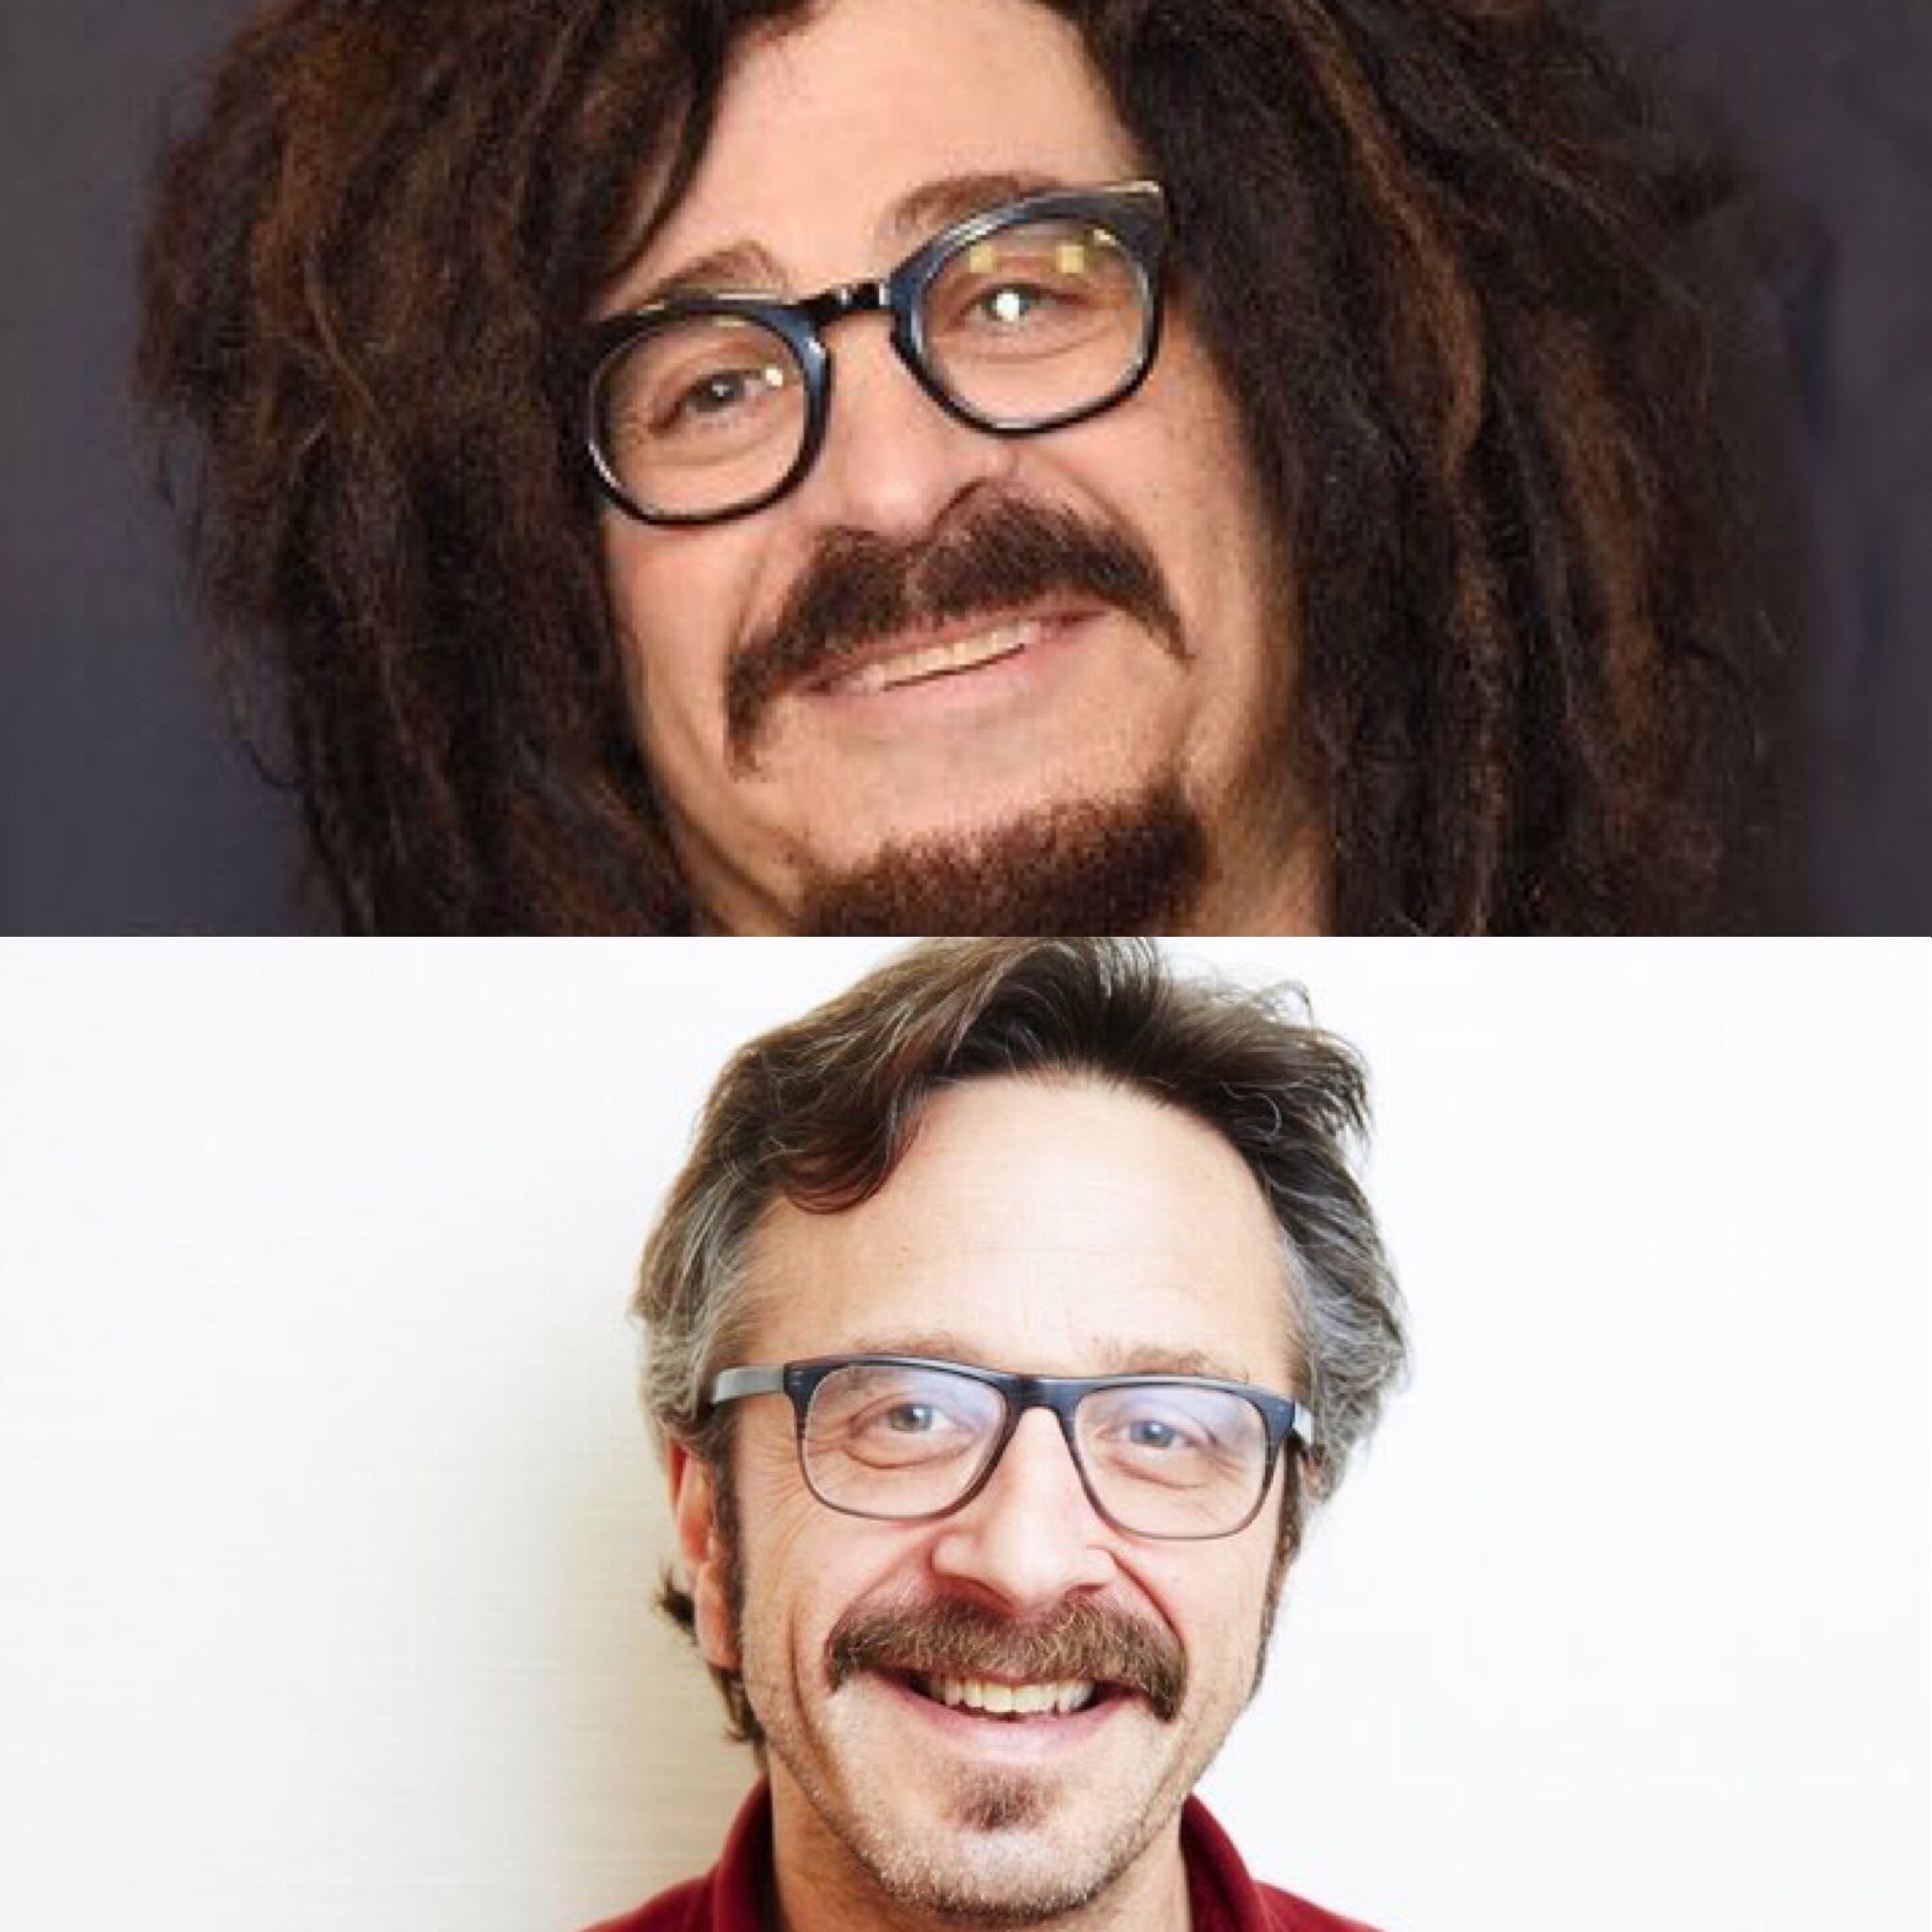 The lead singer of Counting Crows is just Marc Maron in disguise